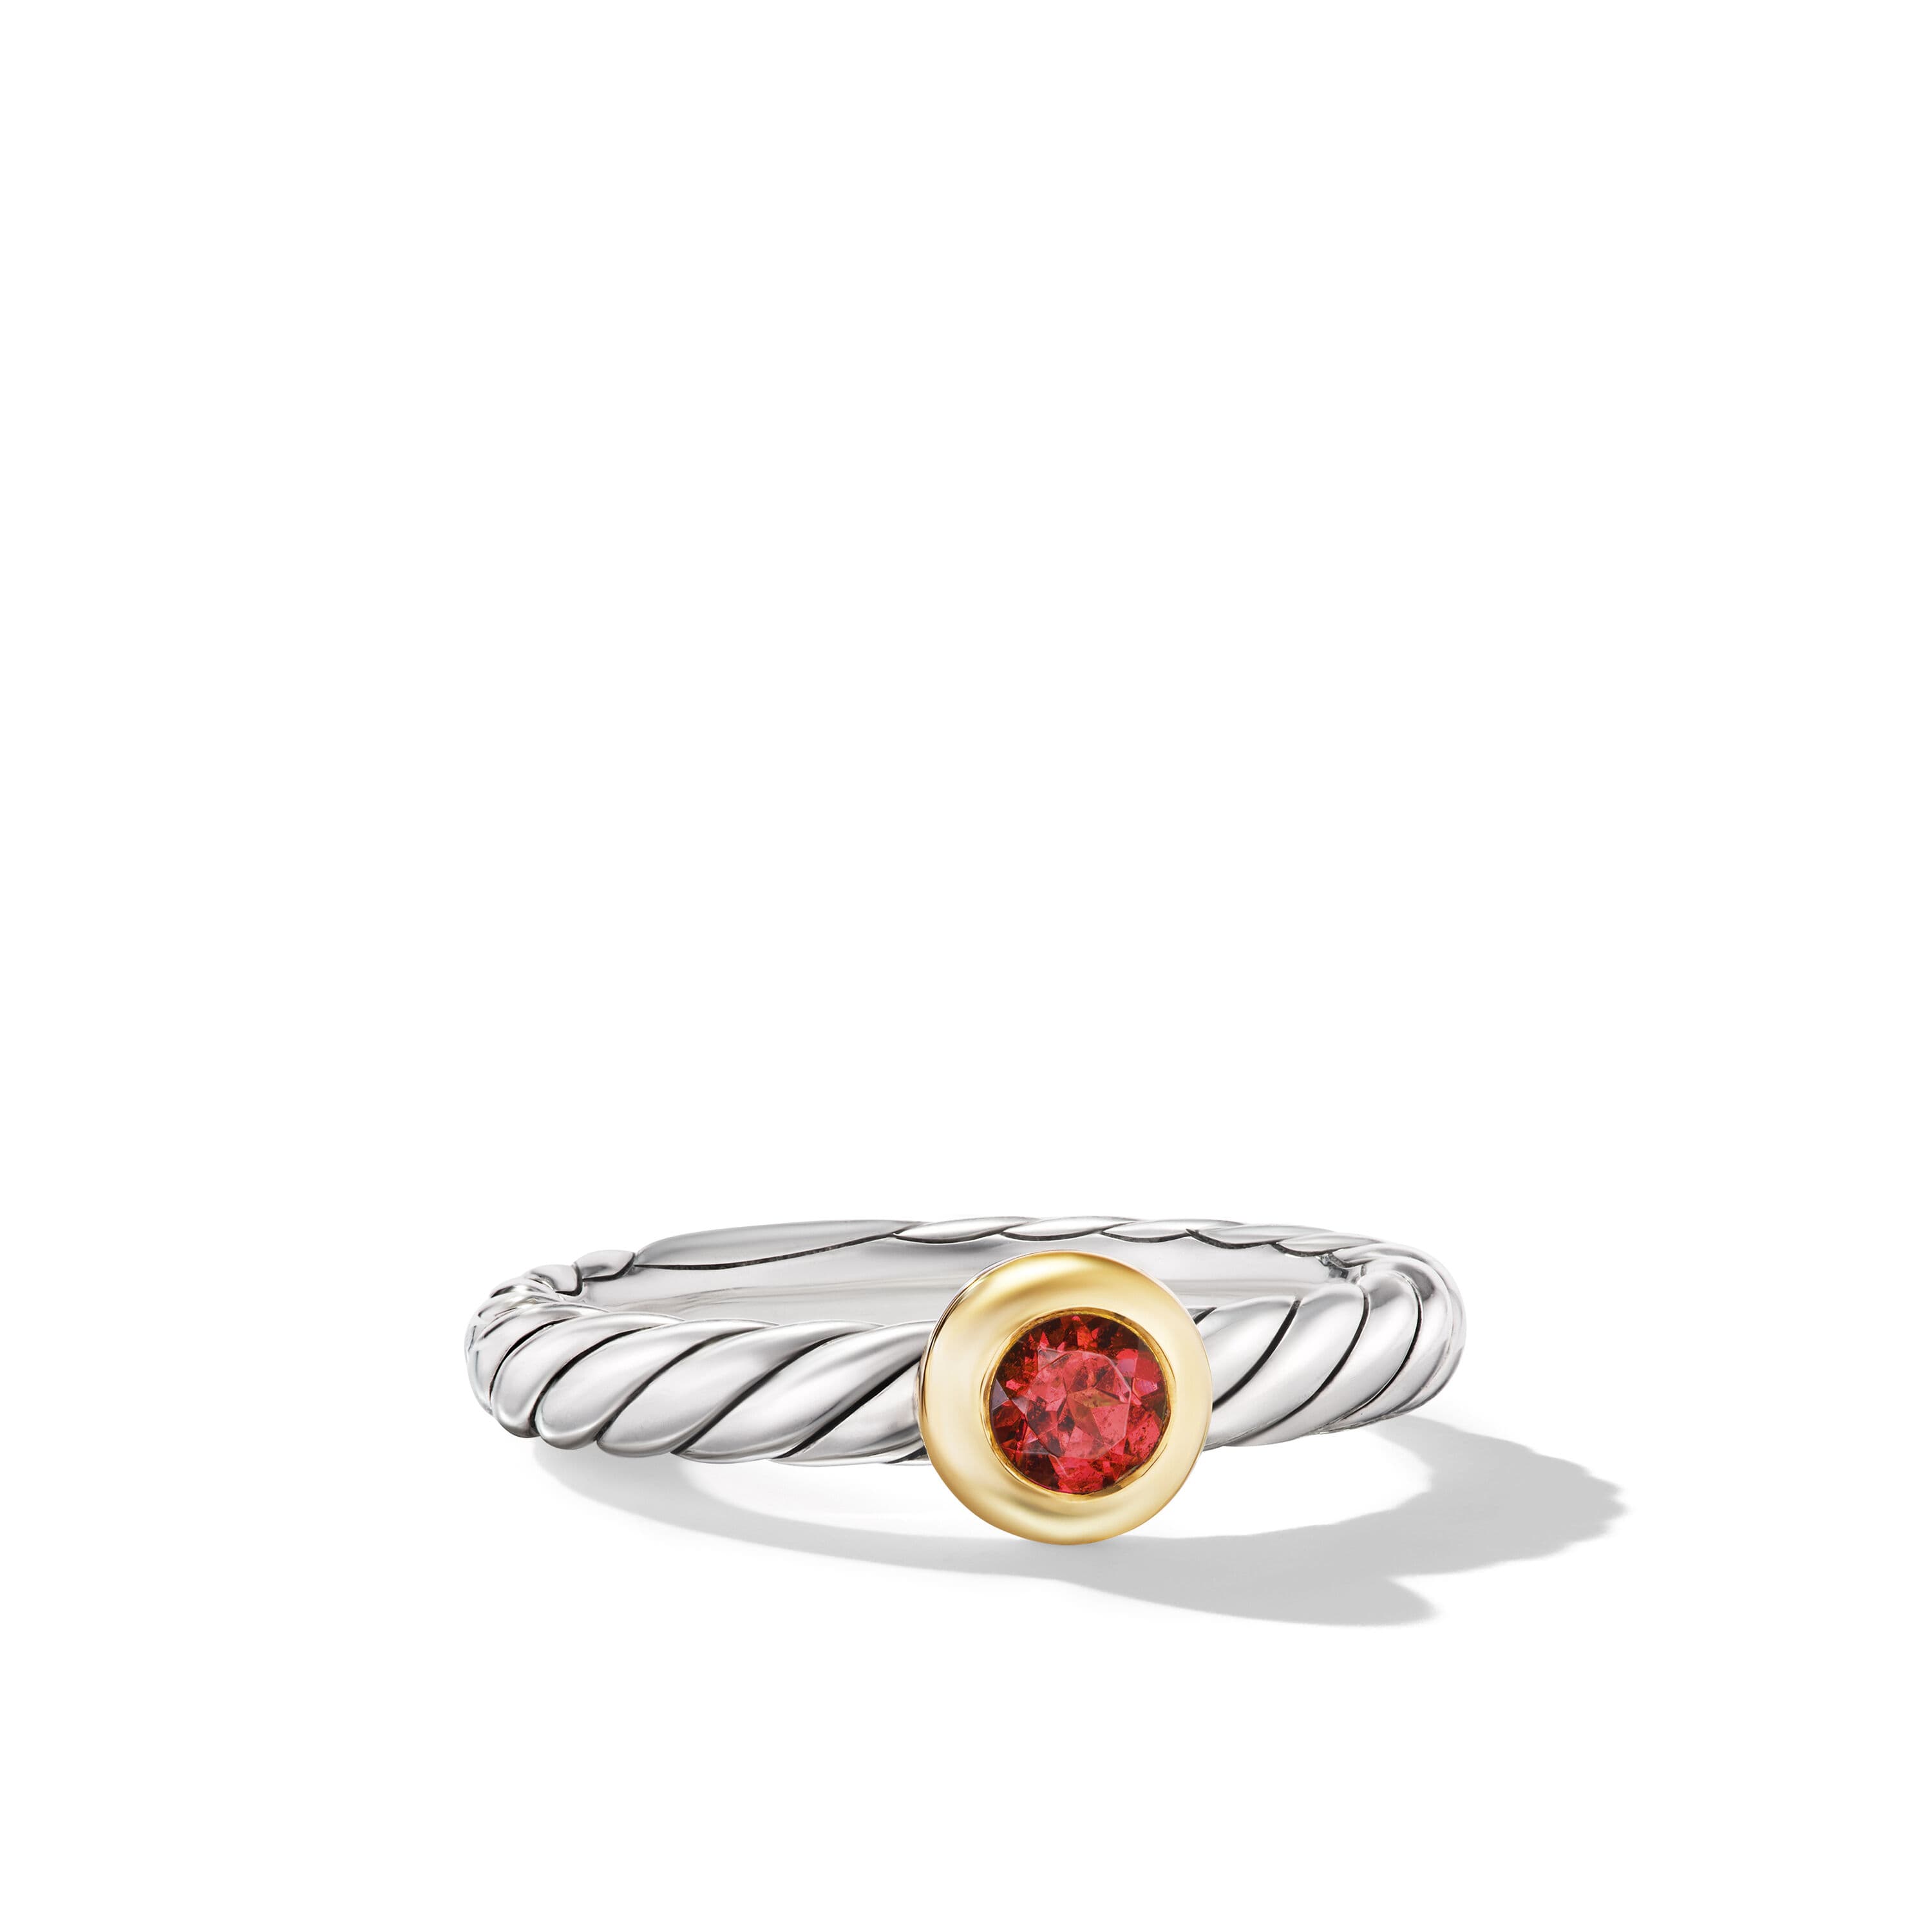 David Yurman Petite Cable Ring in Sterling Silver with 14K Yellow Gold and Garnet, Size 7